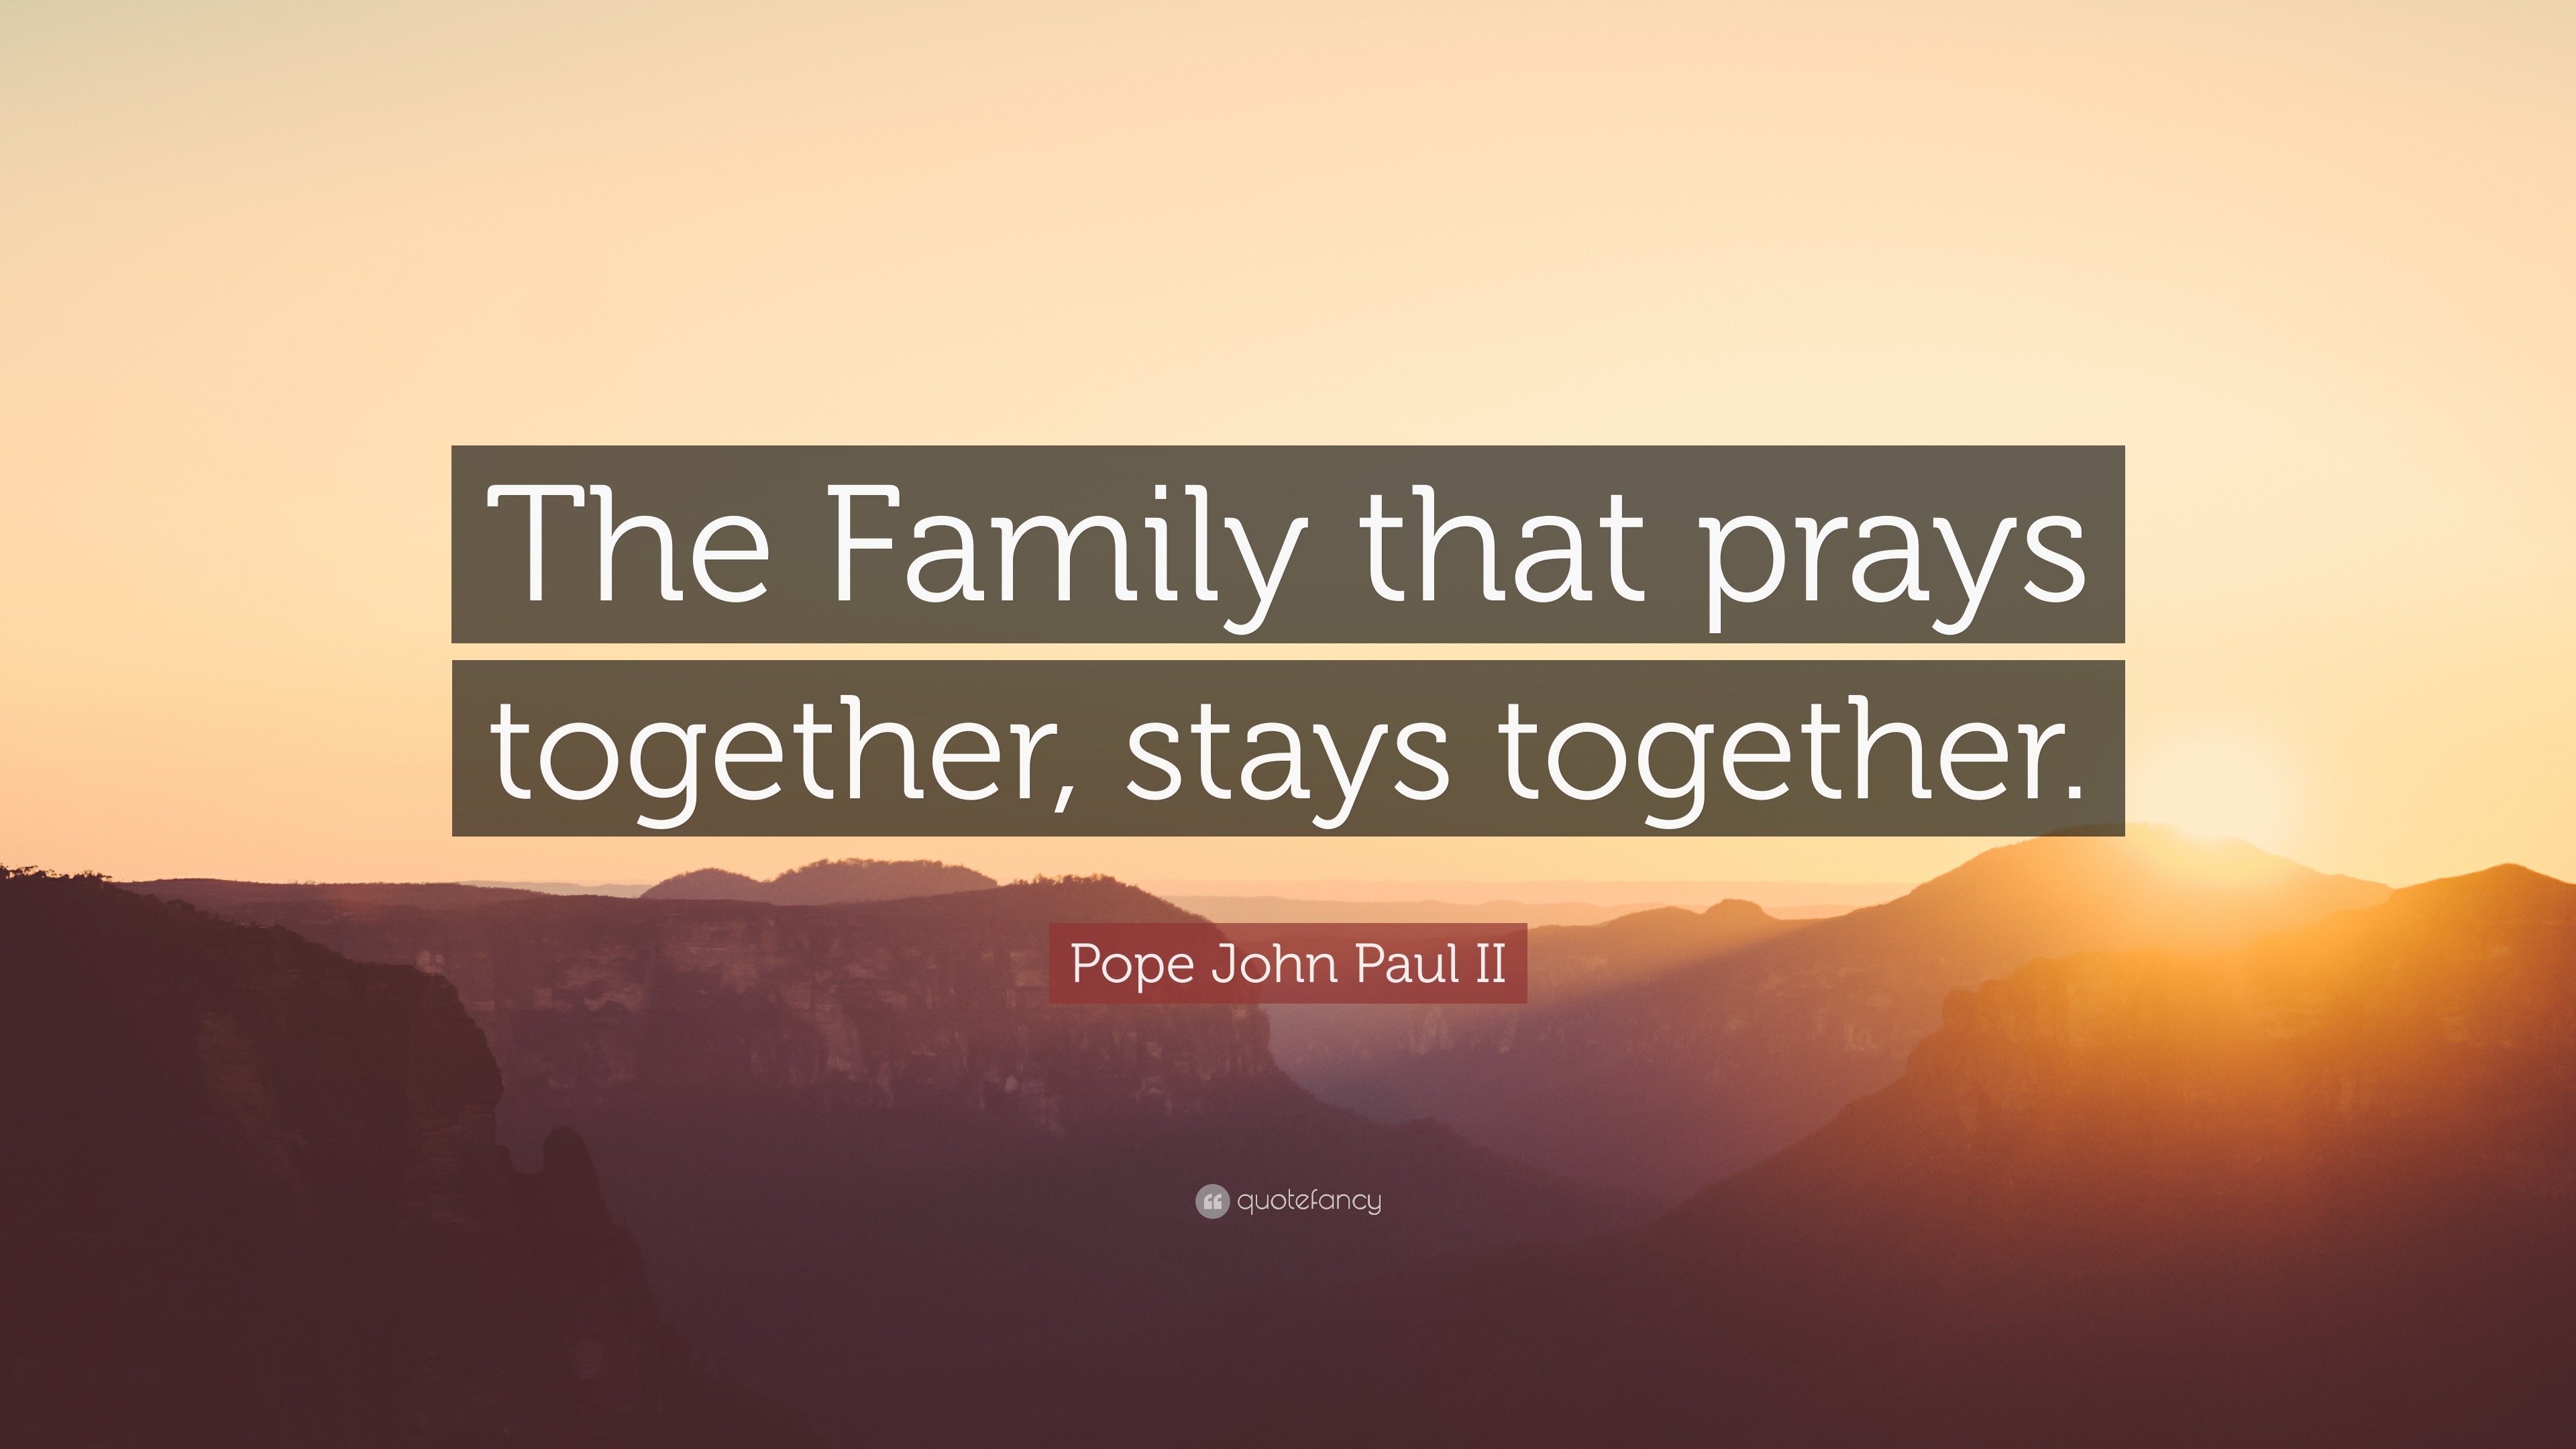 essay about the family that prays together stays together